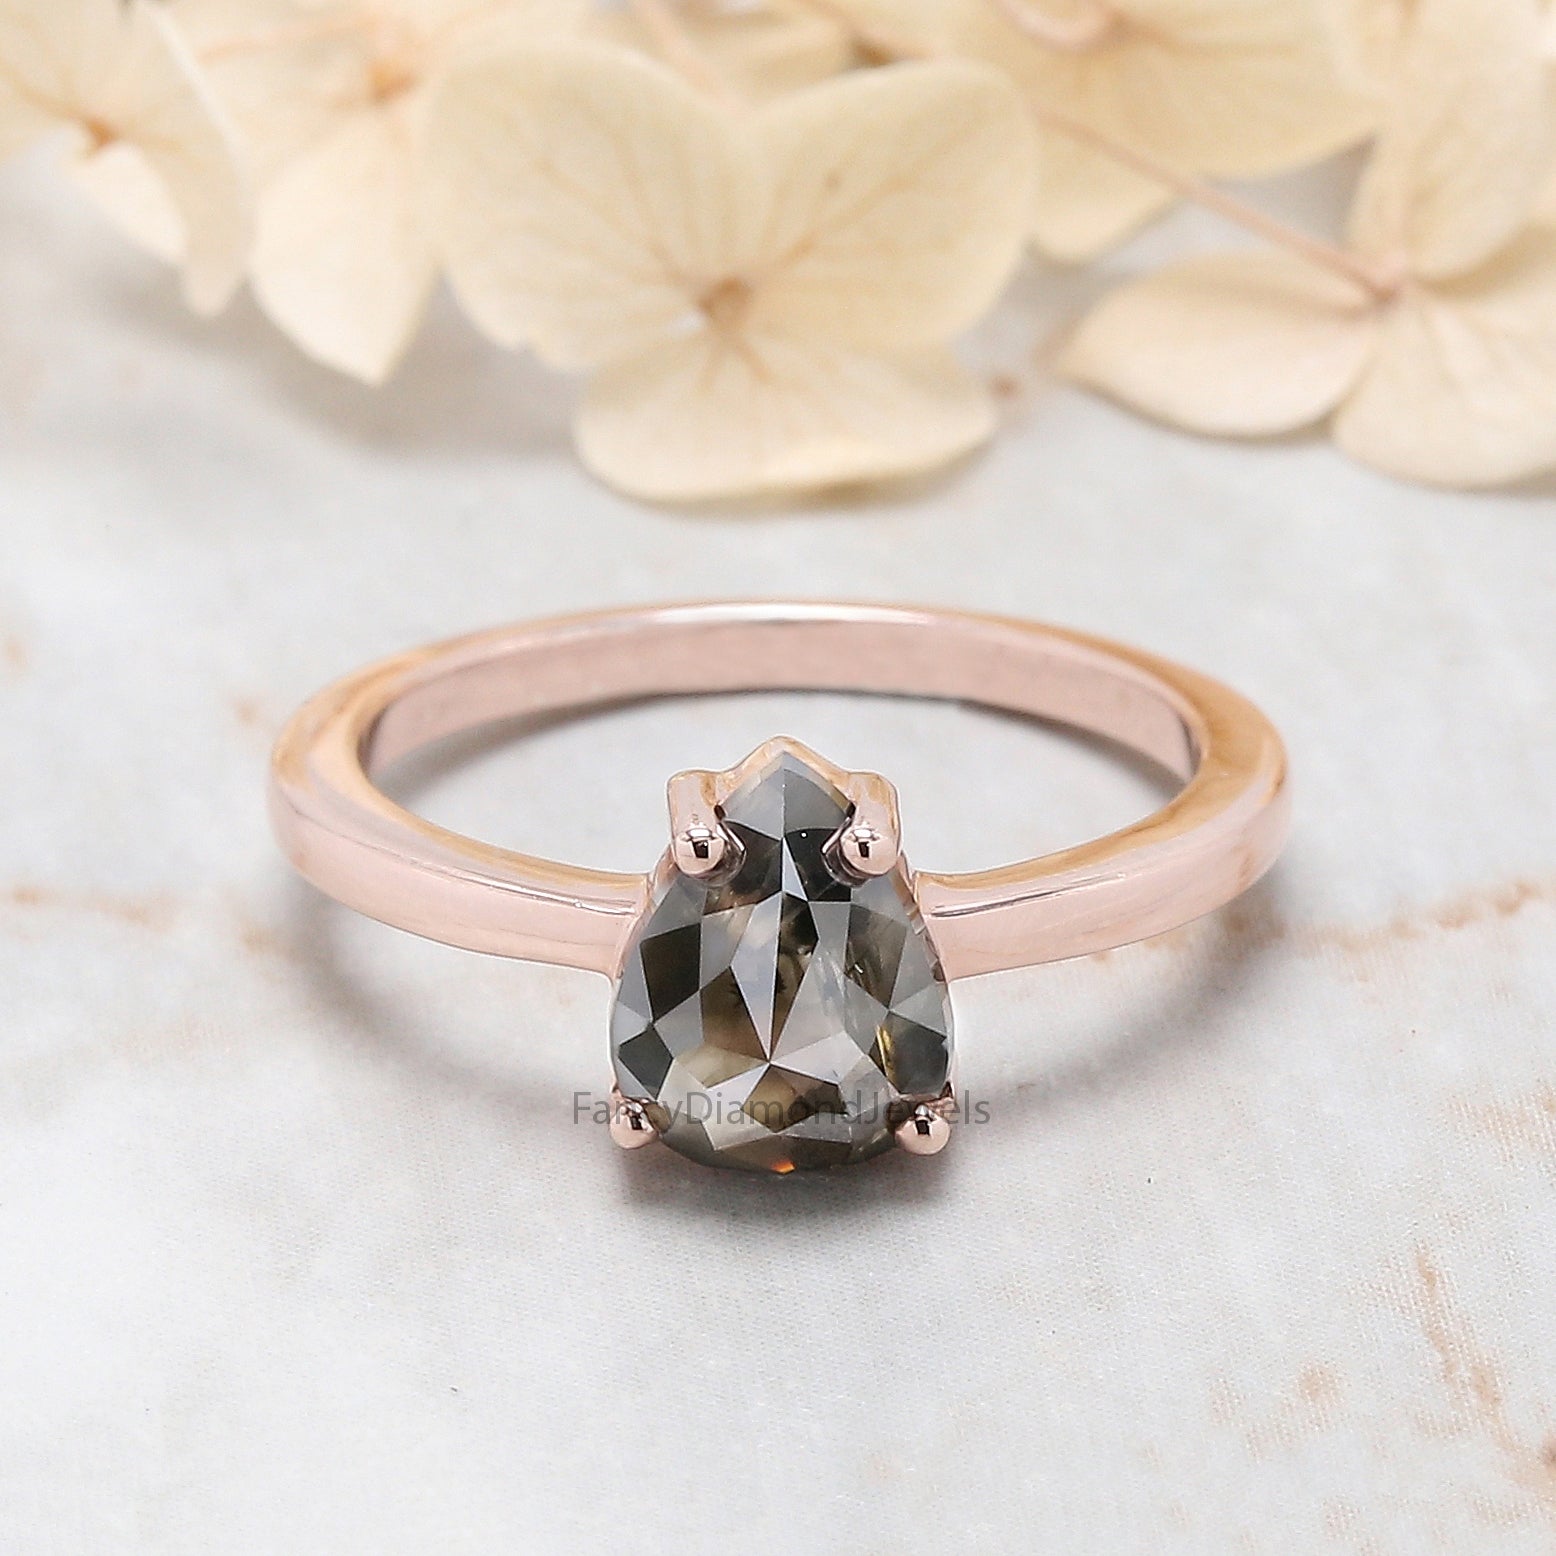 Pear Cut Brown Color Diamond Ring 1.80 Ct 8.30 MM Pear Diamond Ring 14K Solid Rose Gold Silver Pear Engagement Ring Gift For Her QL8894